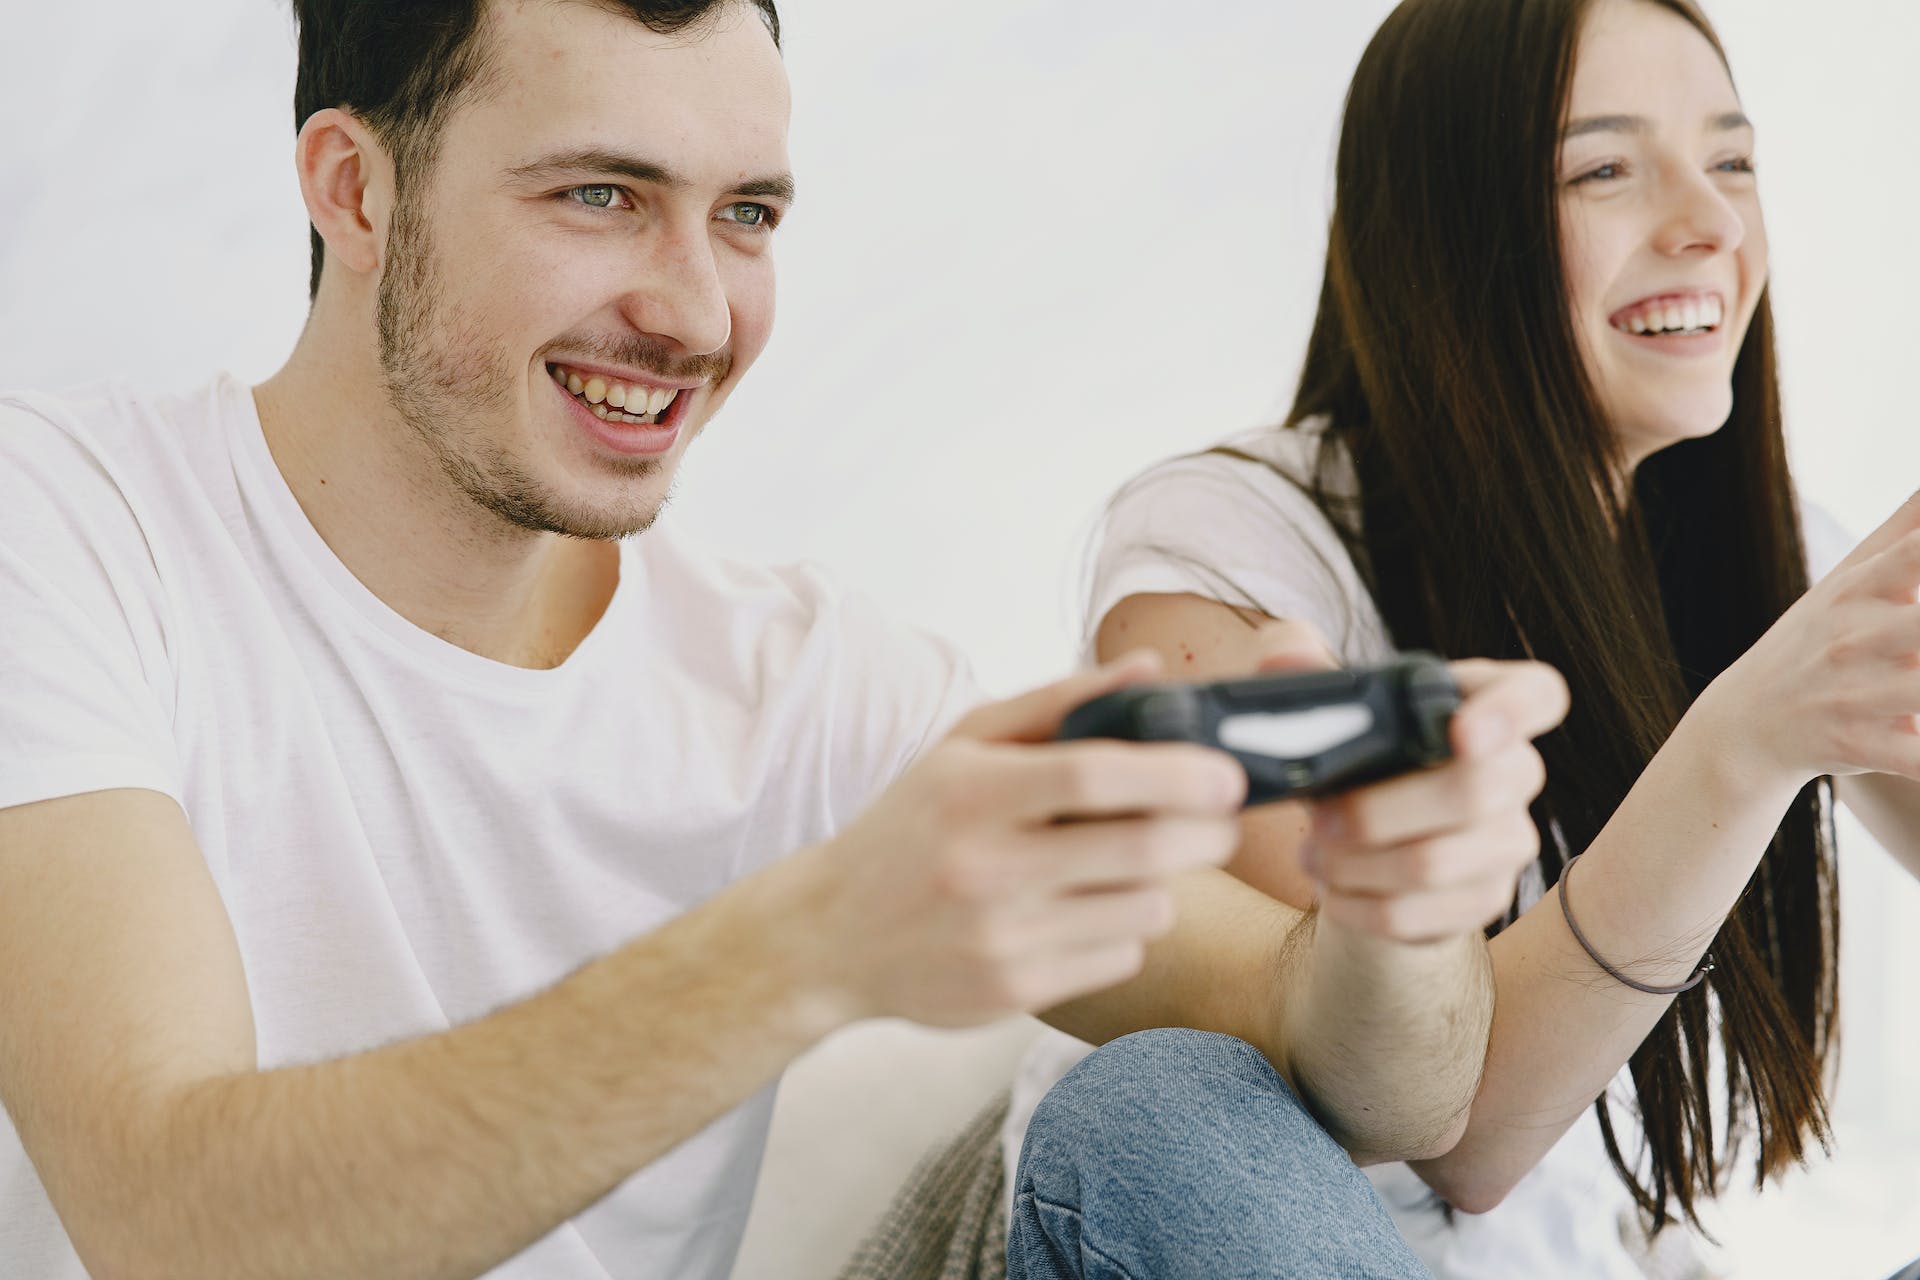 A man and woman playing a video game | Source: Pexels